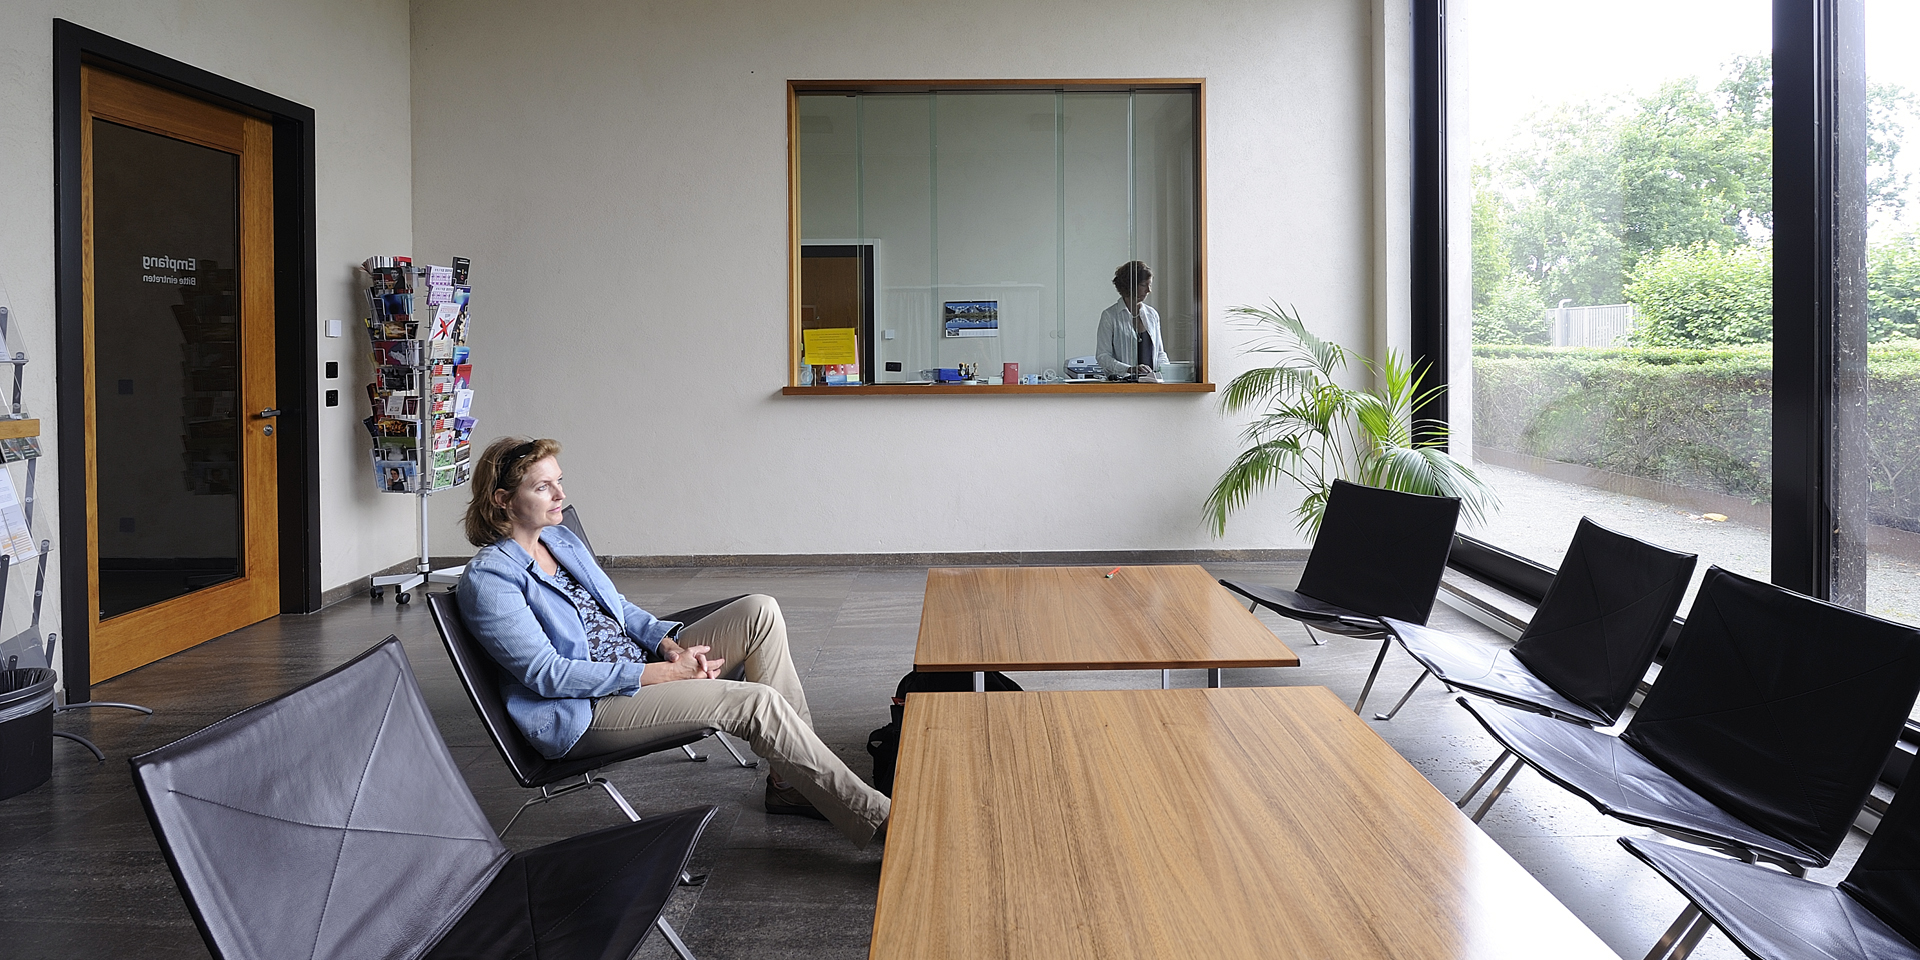 Waiting room at the Swiss consulate in Berlin. A seated woman waits her turn while a consulate staff member work behind the desk.